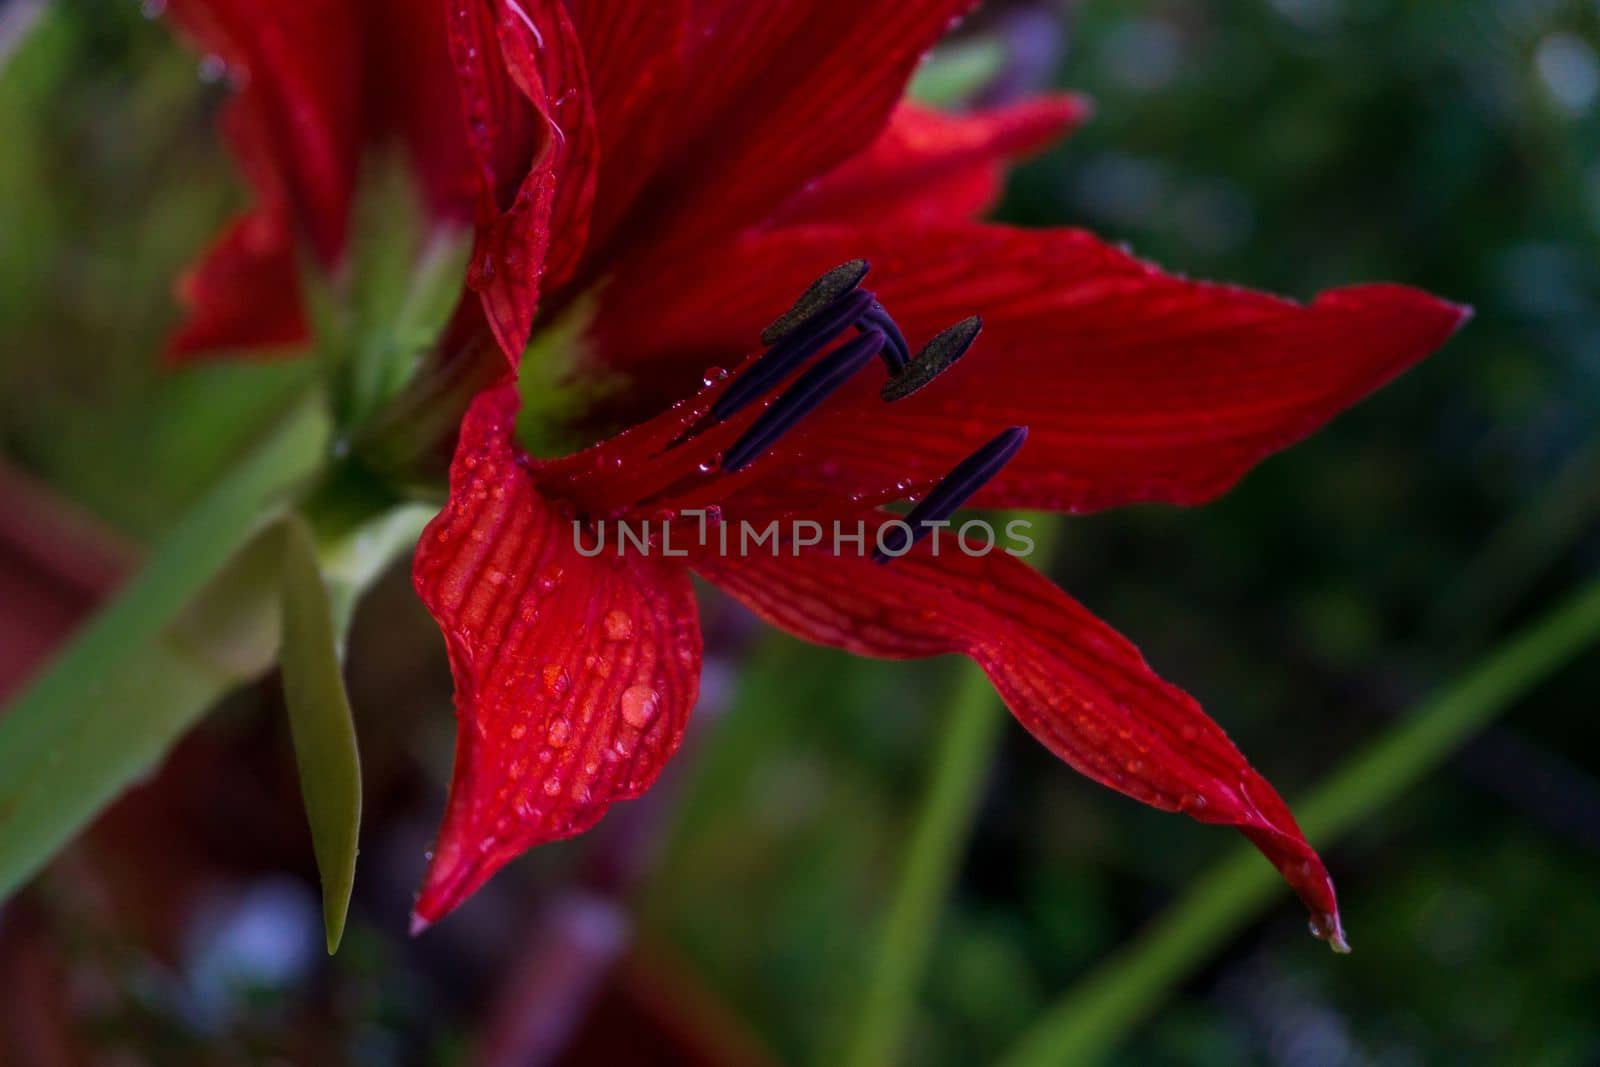 Huge bright red lily flower Amaryllis in the garden with water drops on the petals close up